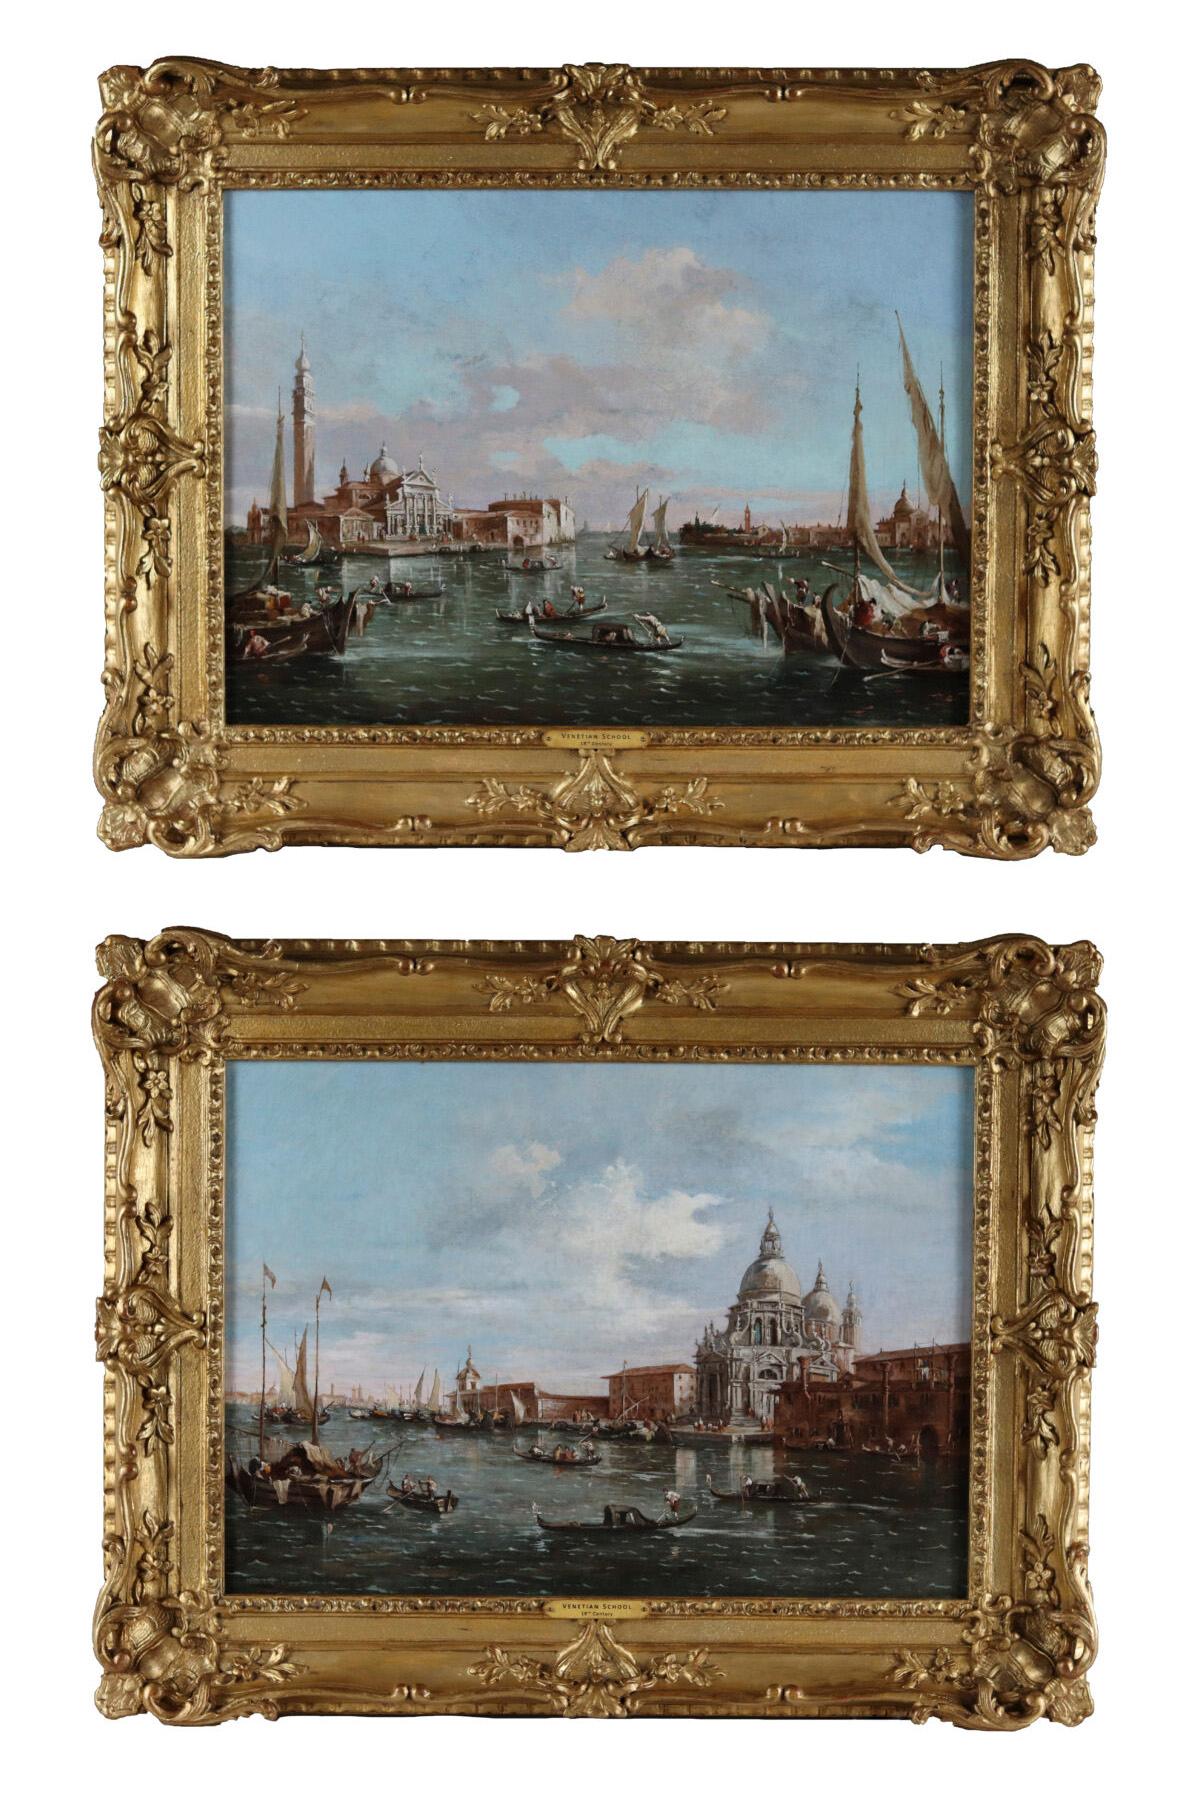 18th Century Italian School Landscape Painting - A Pair of 18th century Venetian Canal Scenes in the Style of Francesco Guardi  